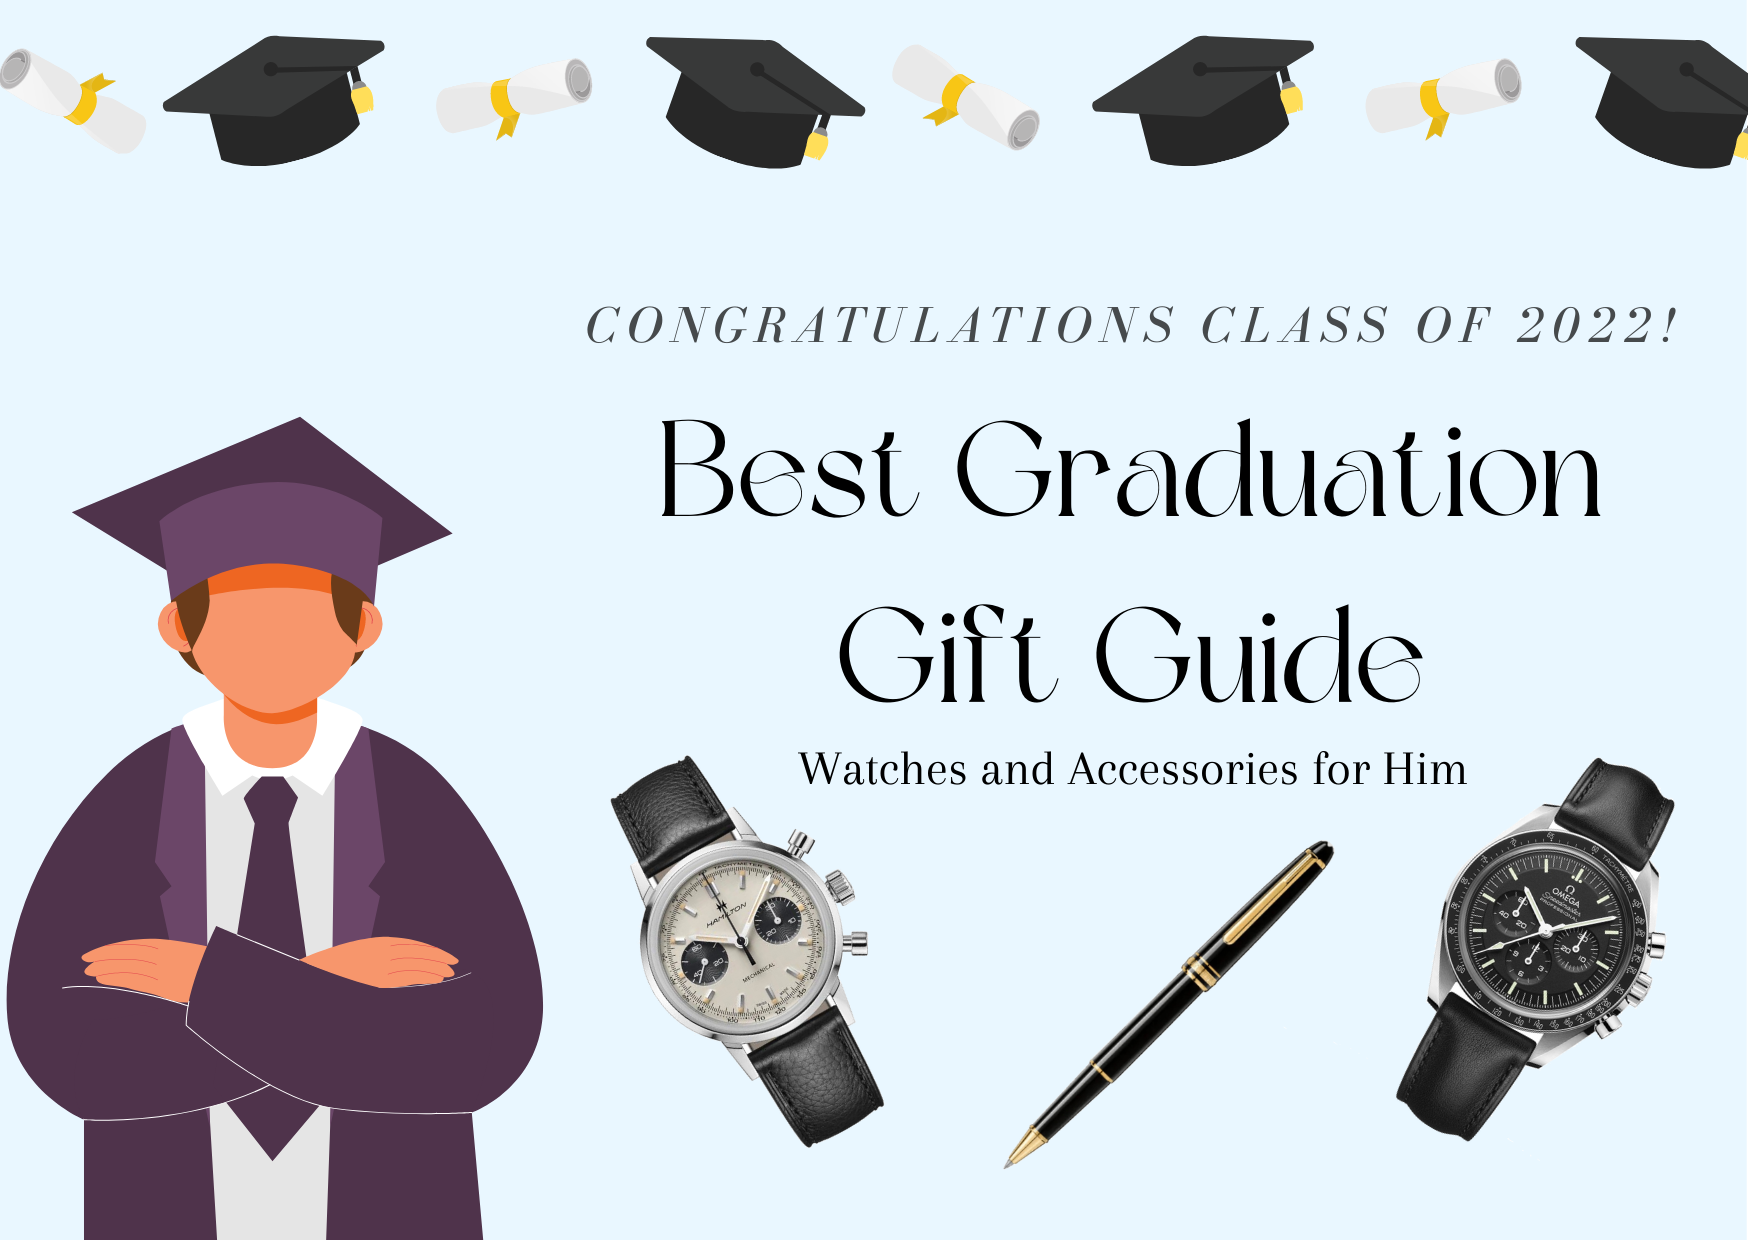 Best Graduation Gift Guide - Watches and Accessories for Him